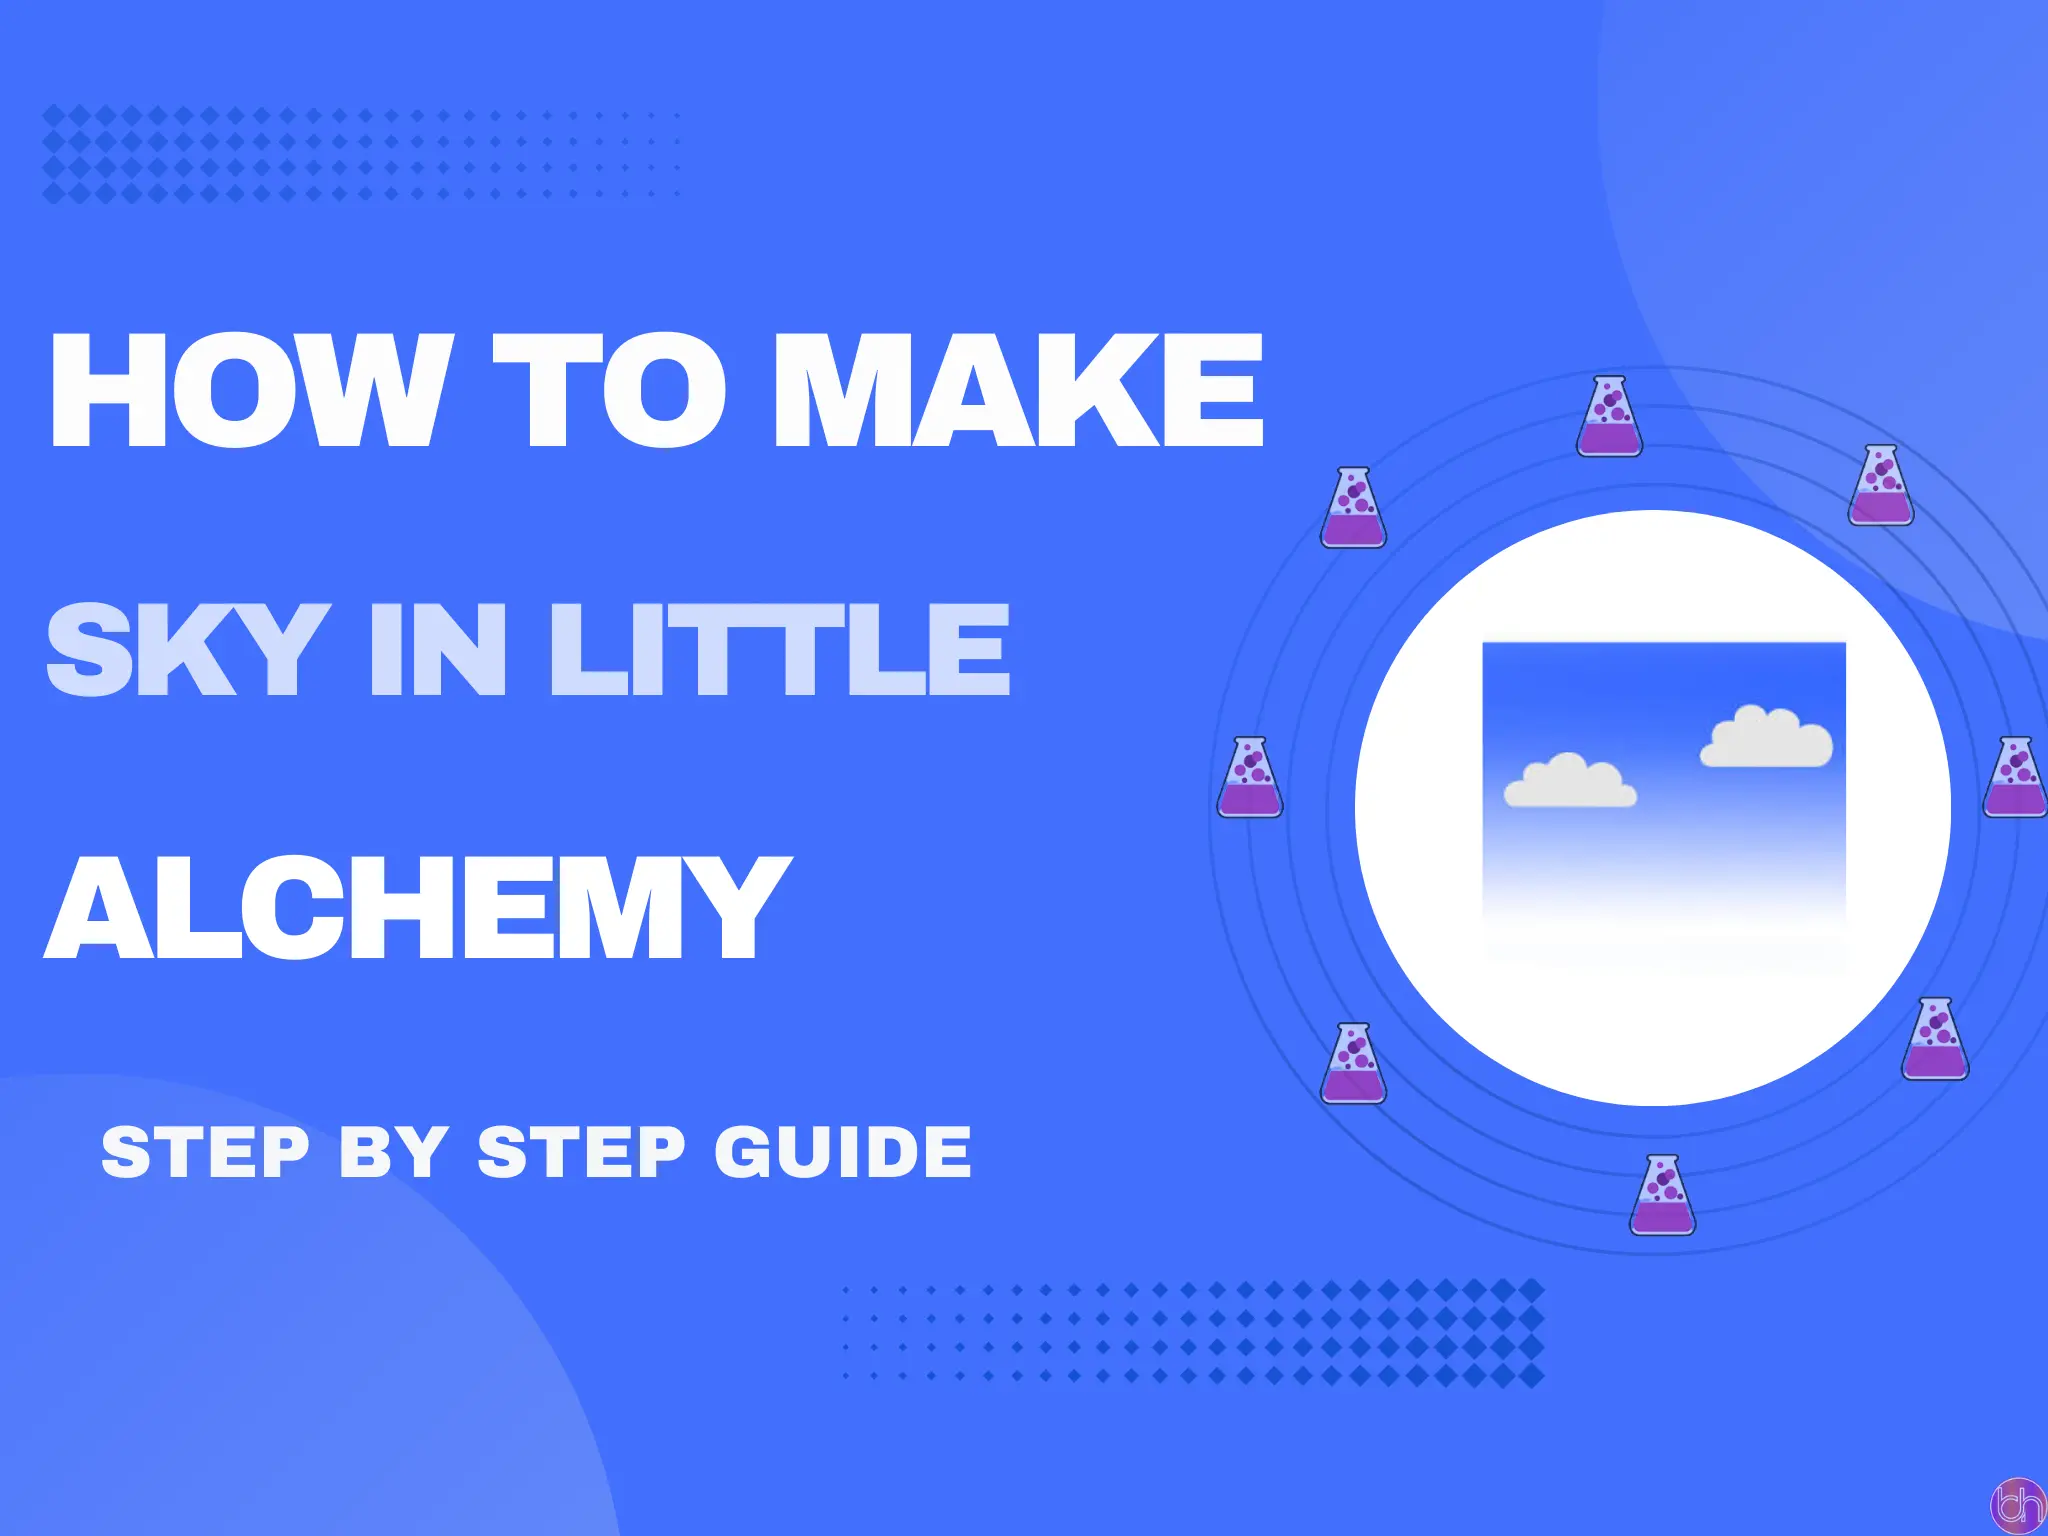 How to make Sky in little alchemy